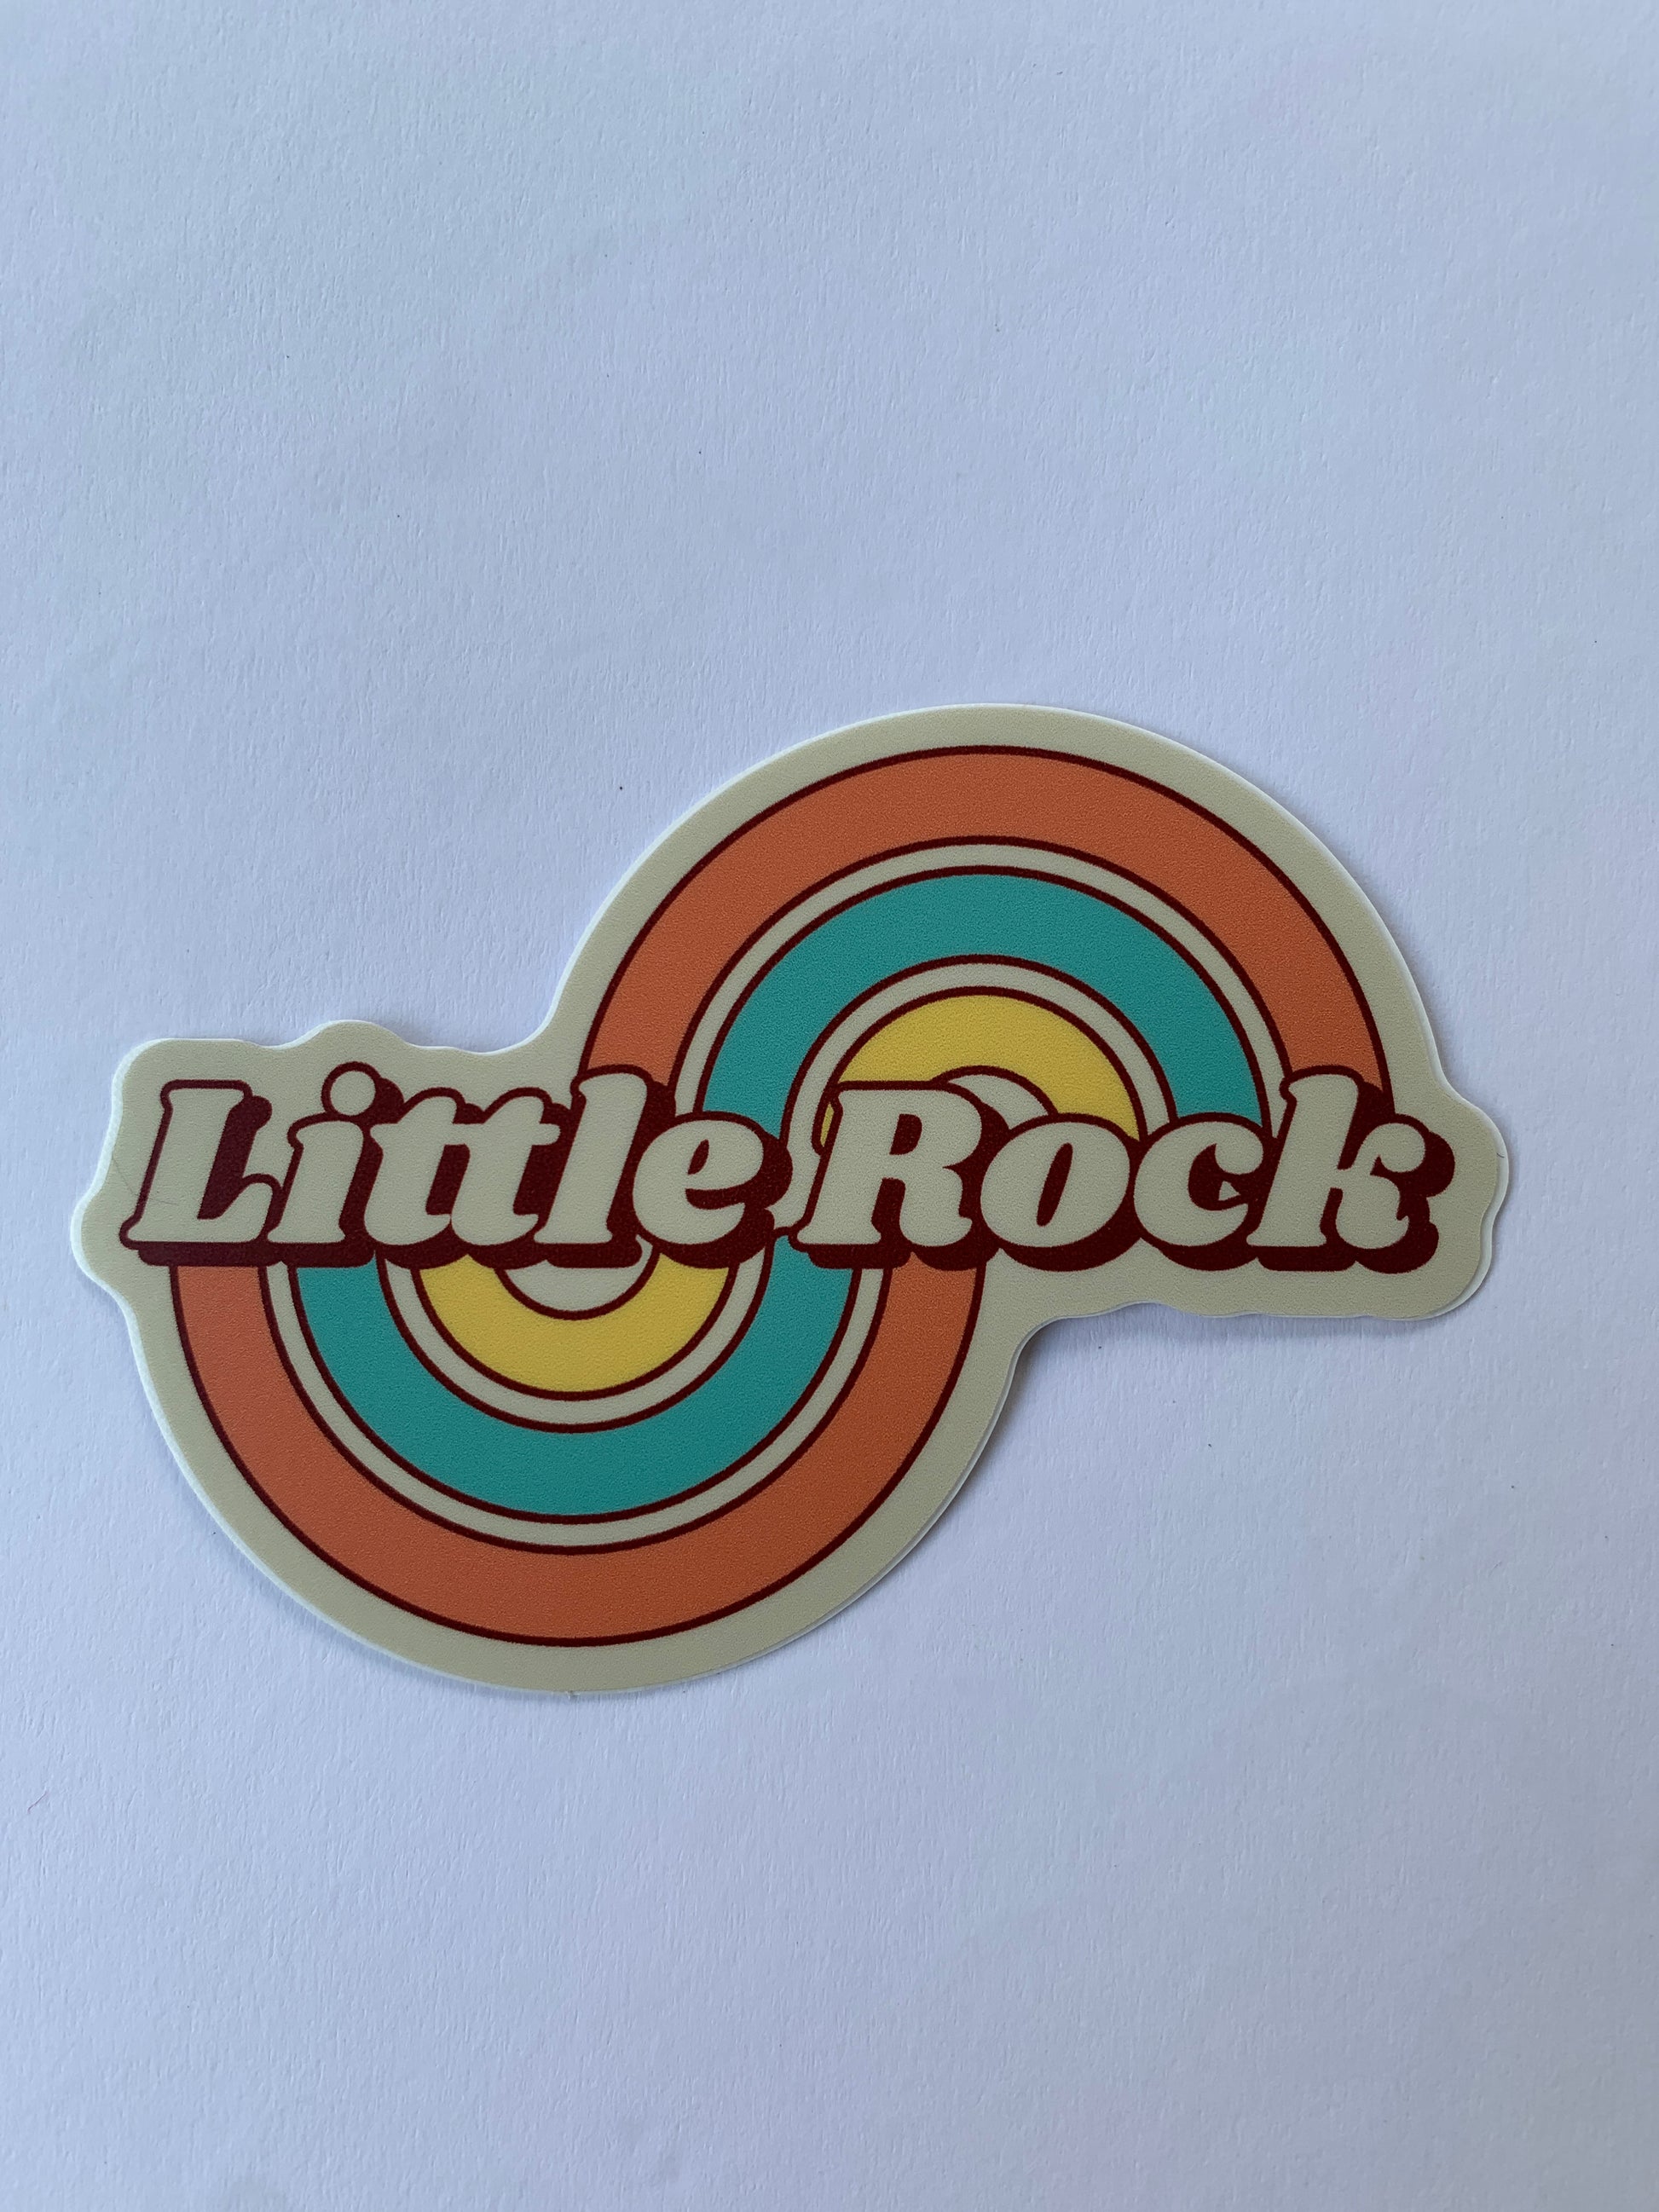 sticker on white background. sticker has graphic of swirling rainbow with "little rock across the center in retro type font.